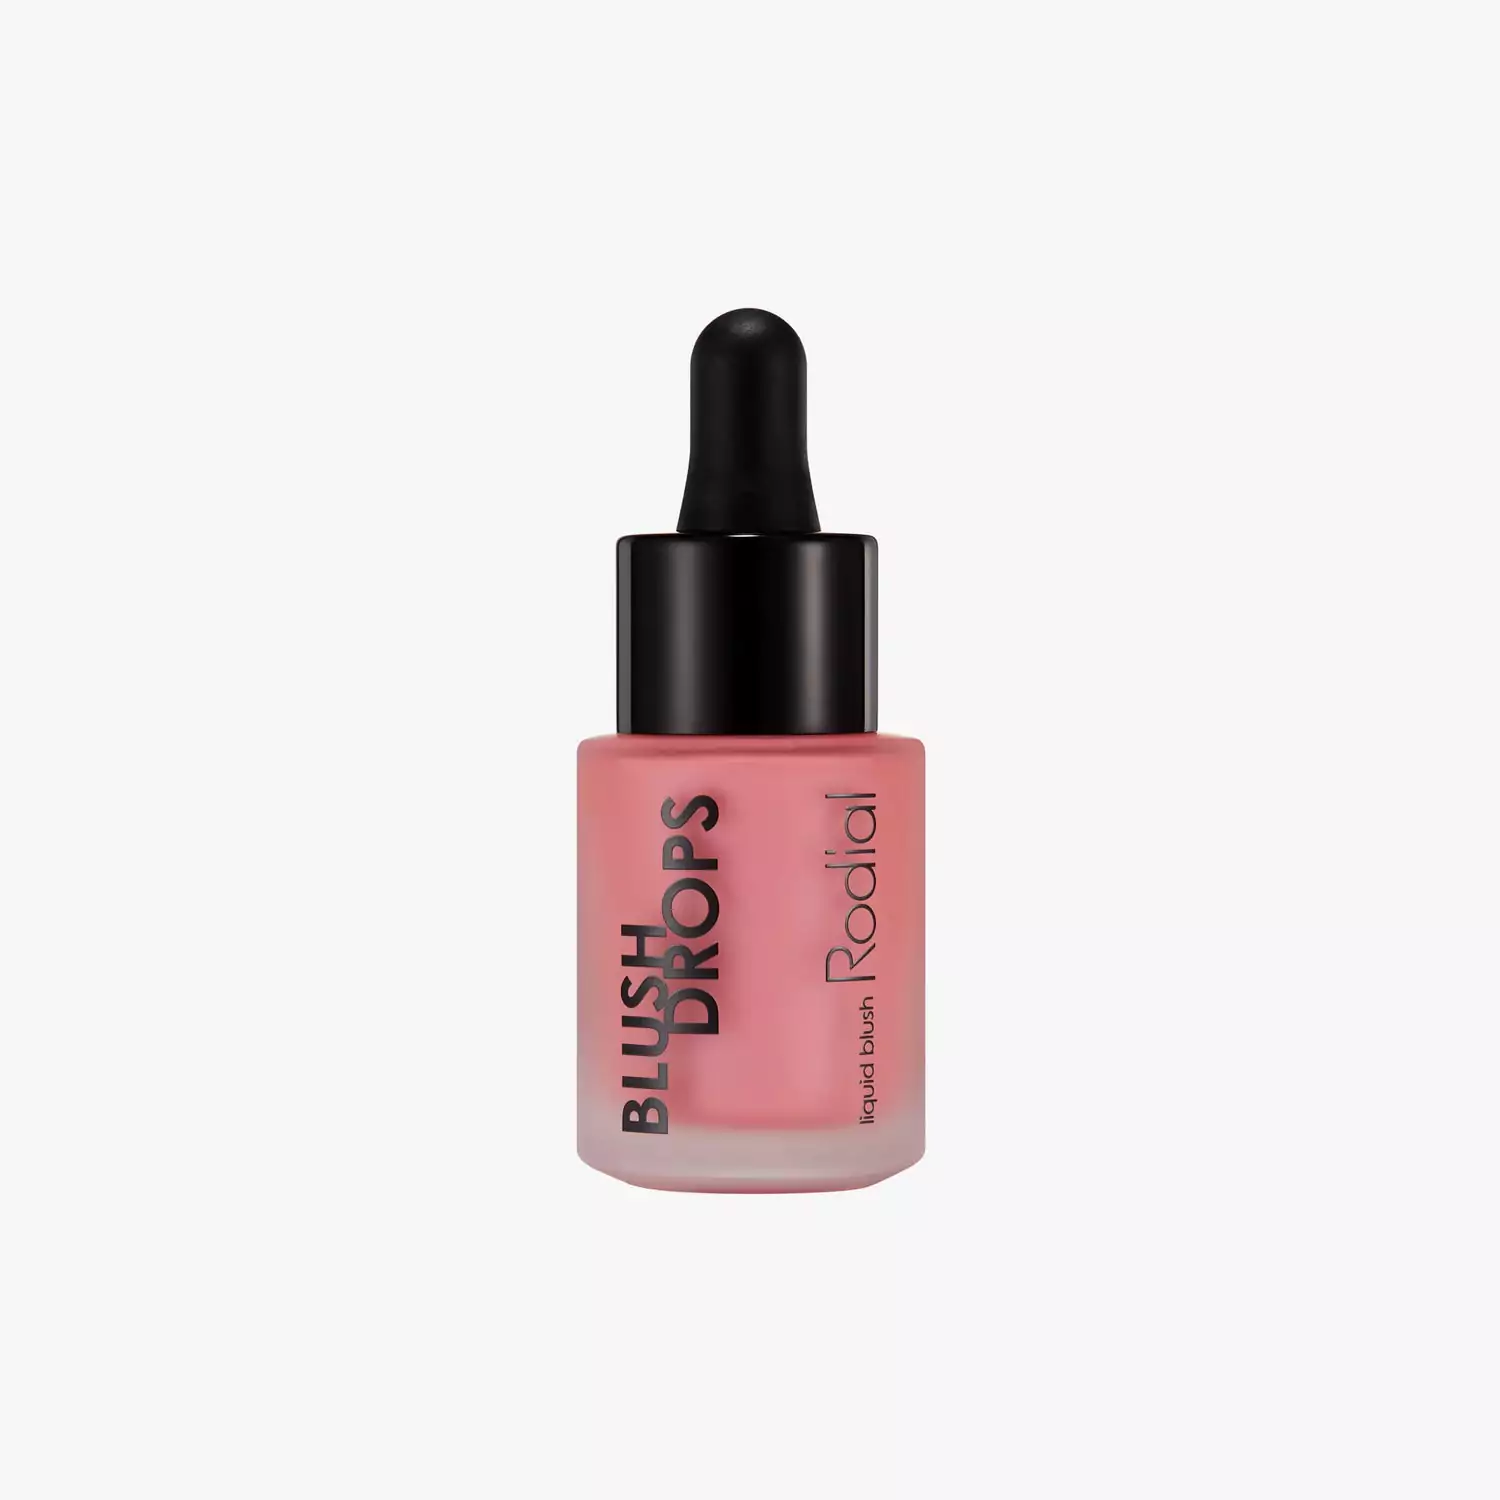 Rodial Blush Drops – Frosted Pink Discounts and Cashback